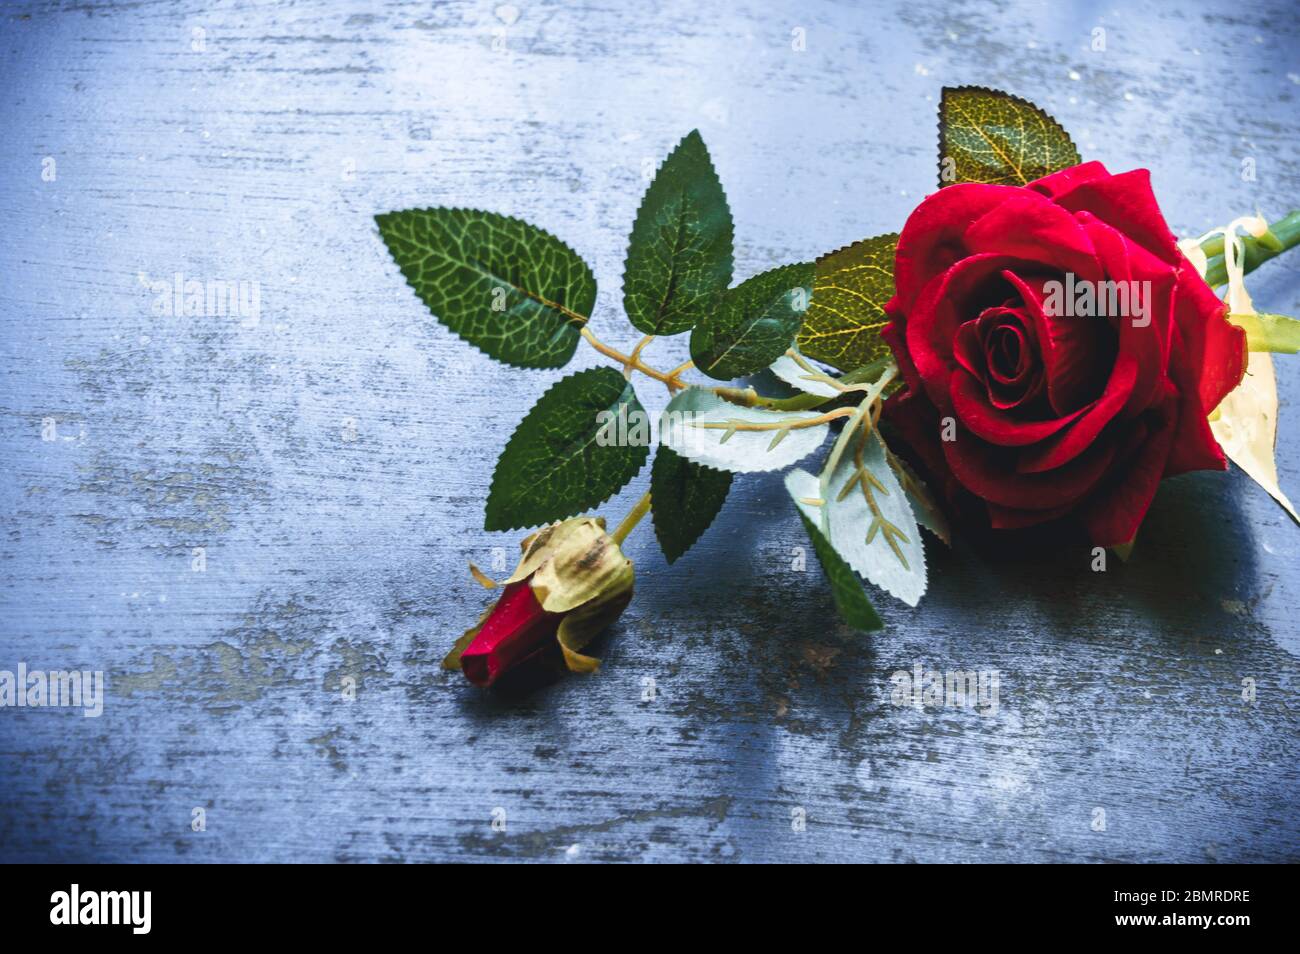 Red rose flower on rustic floor. Nature still life love romantic background  theme. Wallpaper web banner design decoration for friendship and valentine  Stock Photo - Alamy